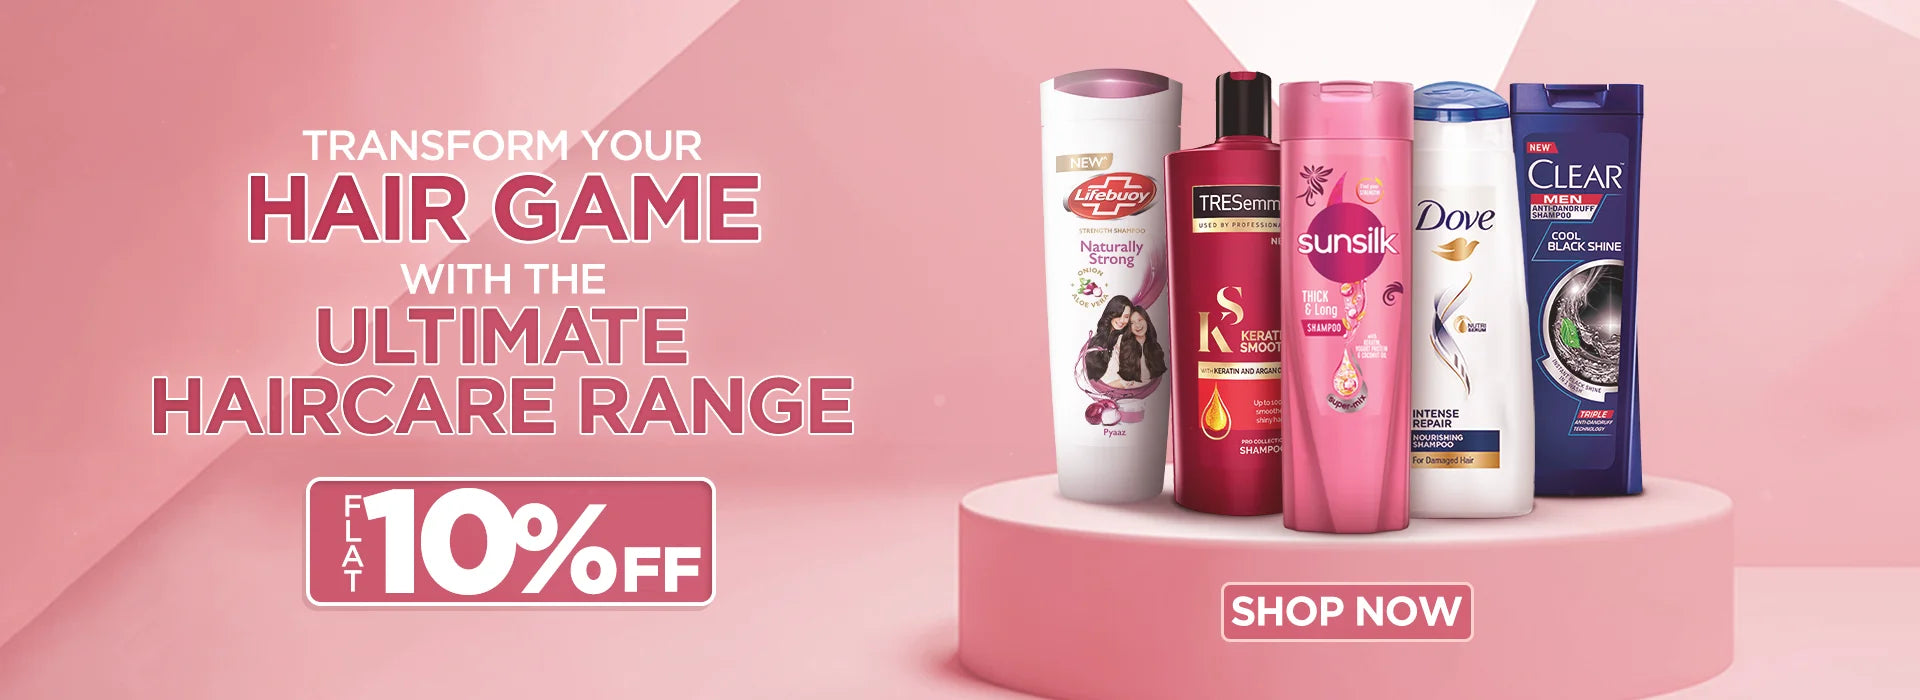 Transform Your Hair With The Best Haircare Range | Flat 10%  Off